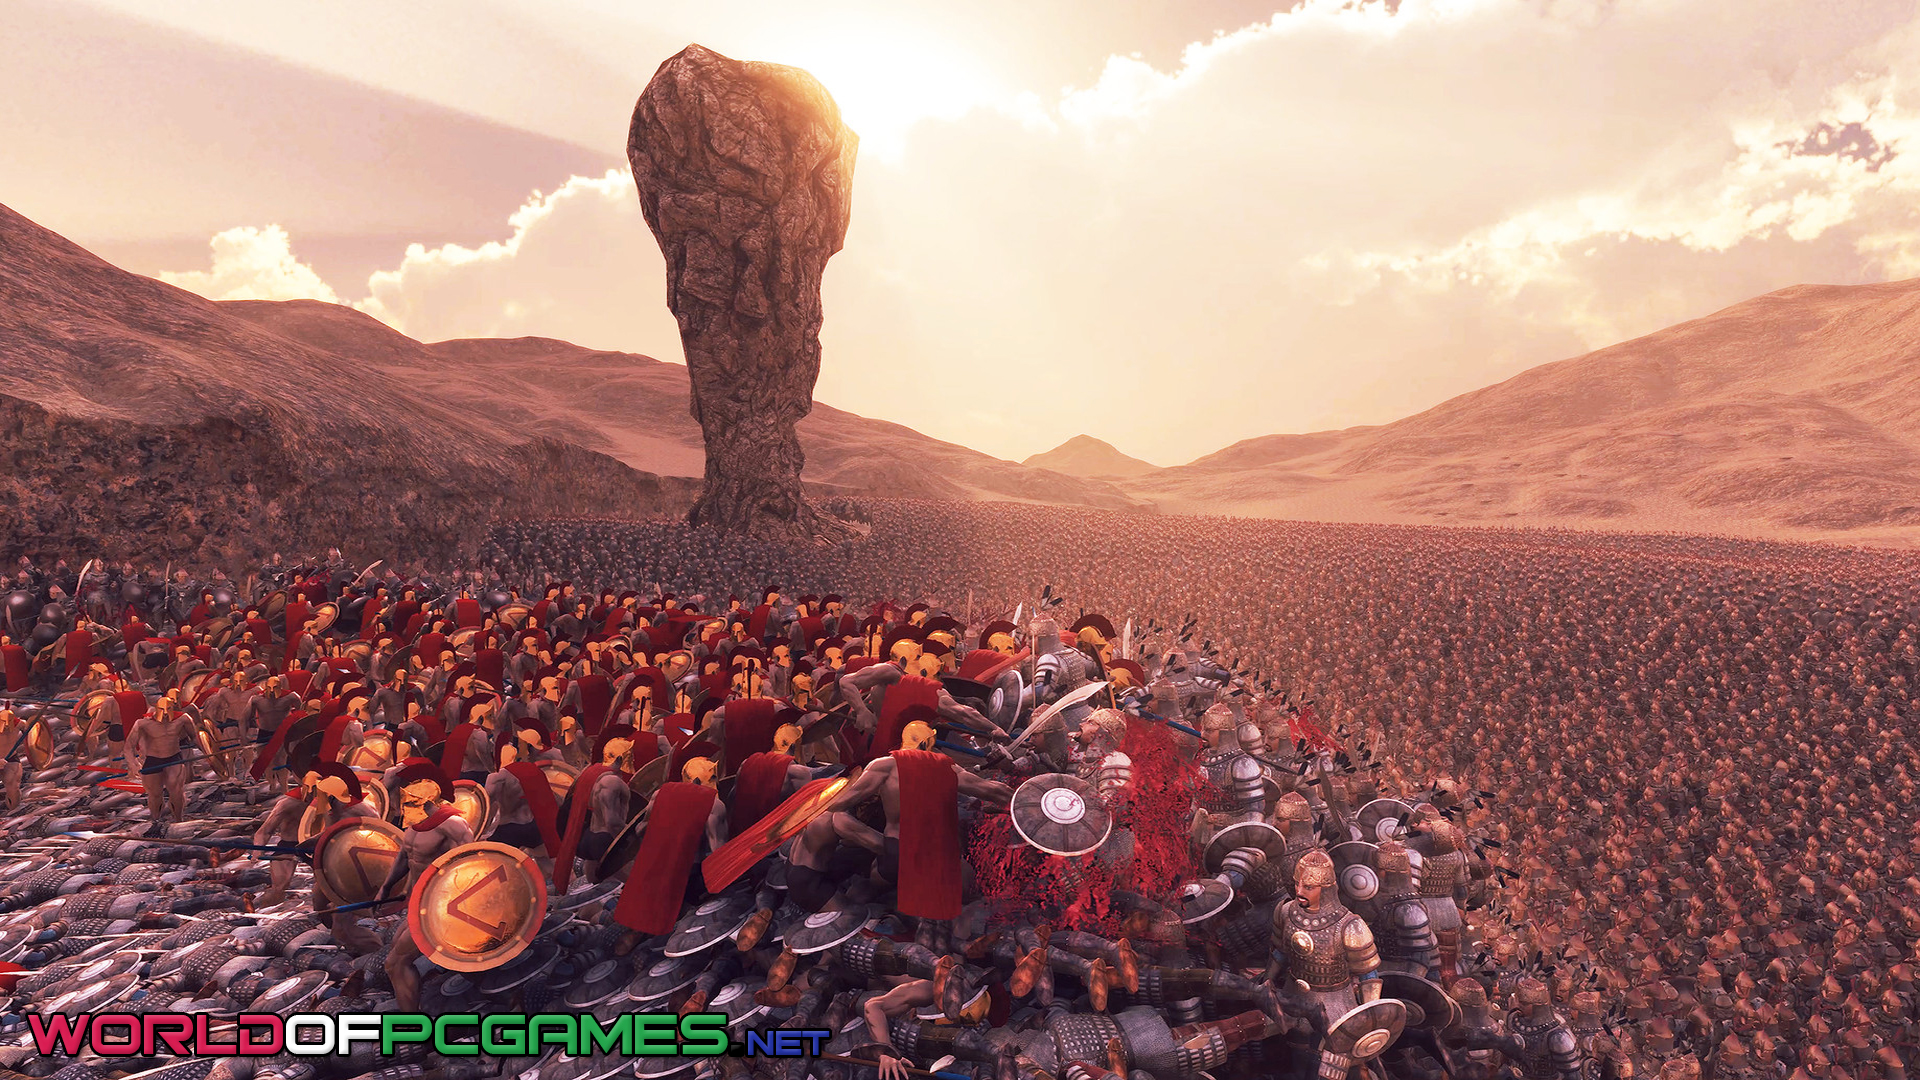 Ultimate Epic Battle Simulator Free Download PC Game By worldof-pcgames.netm